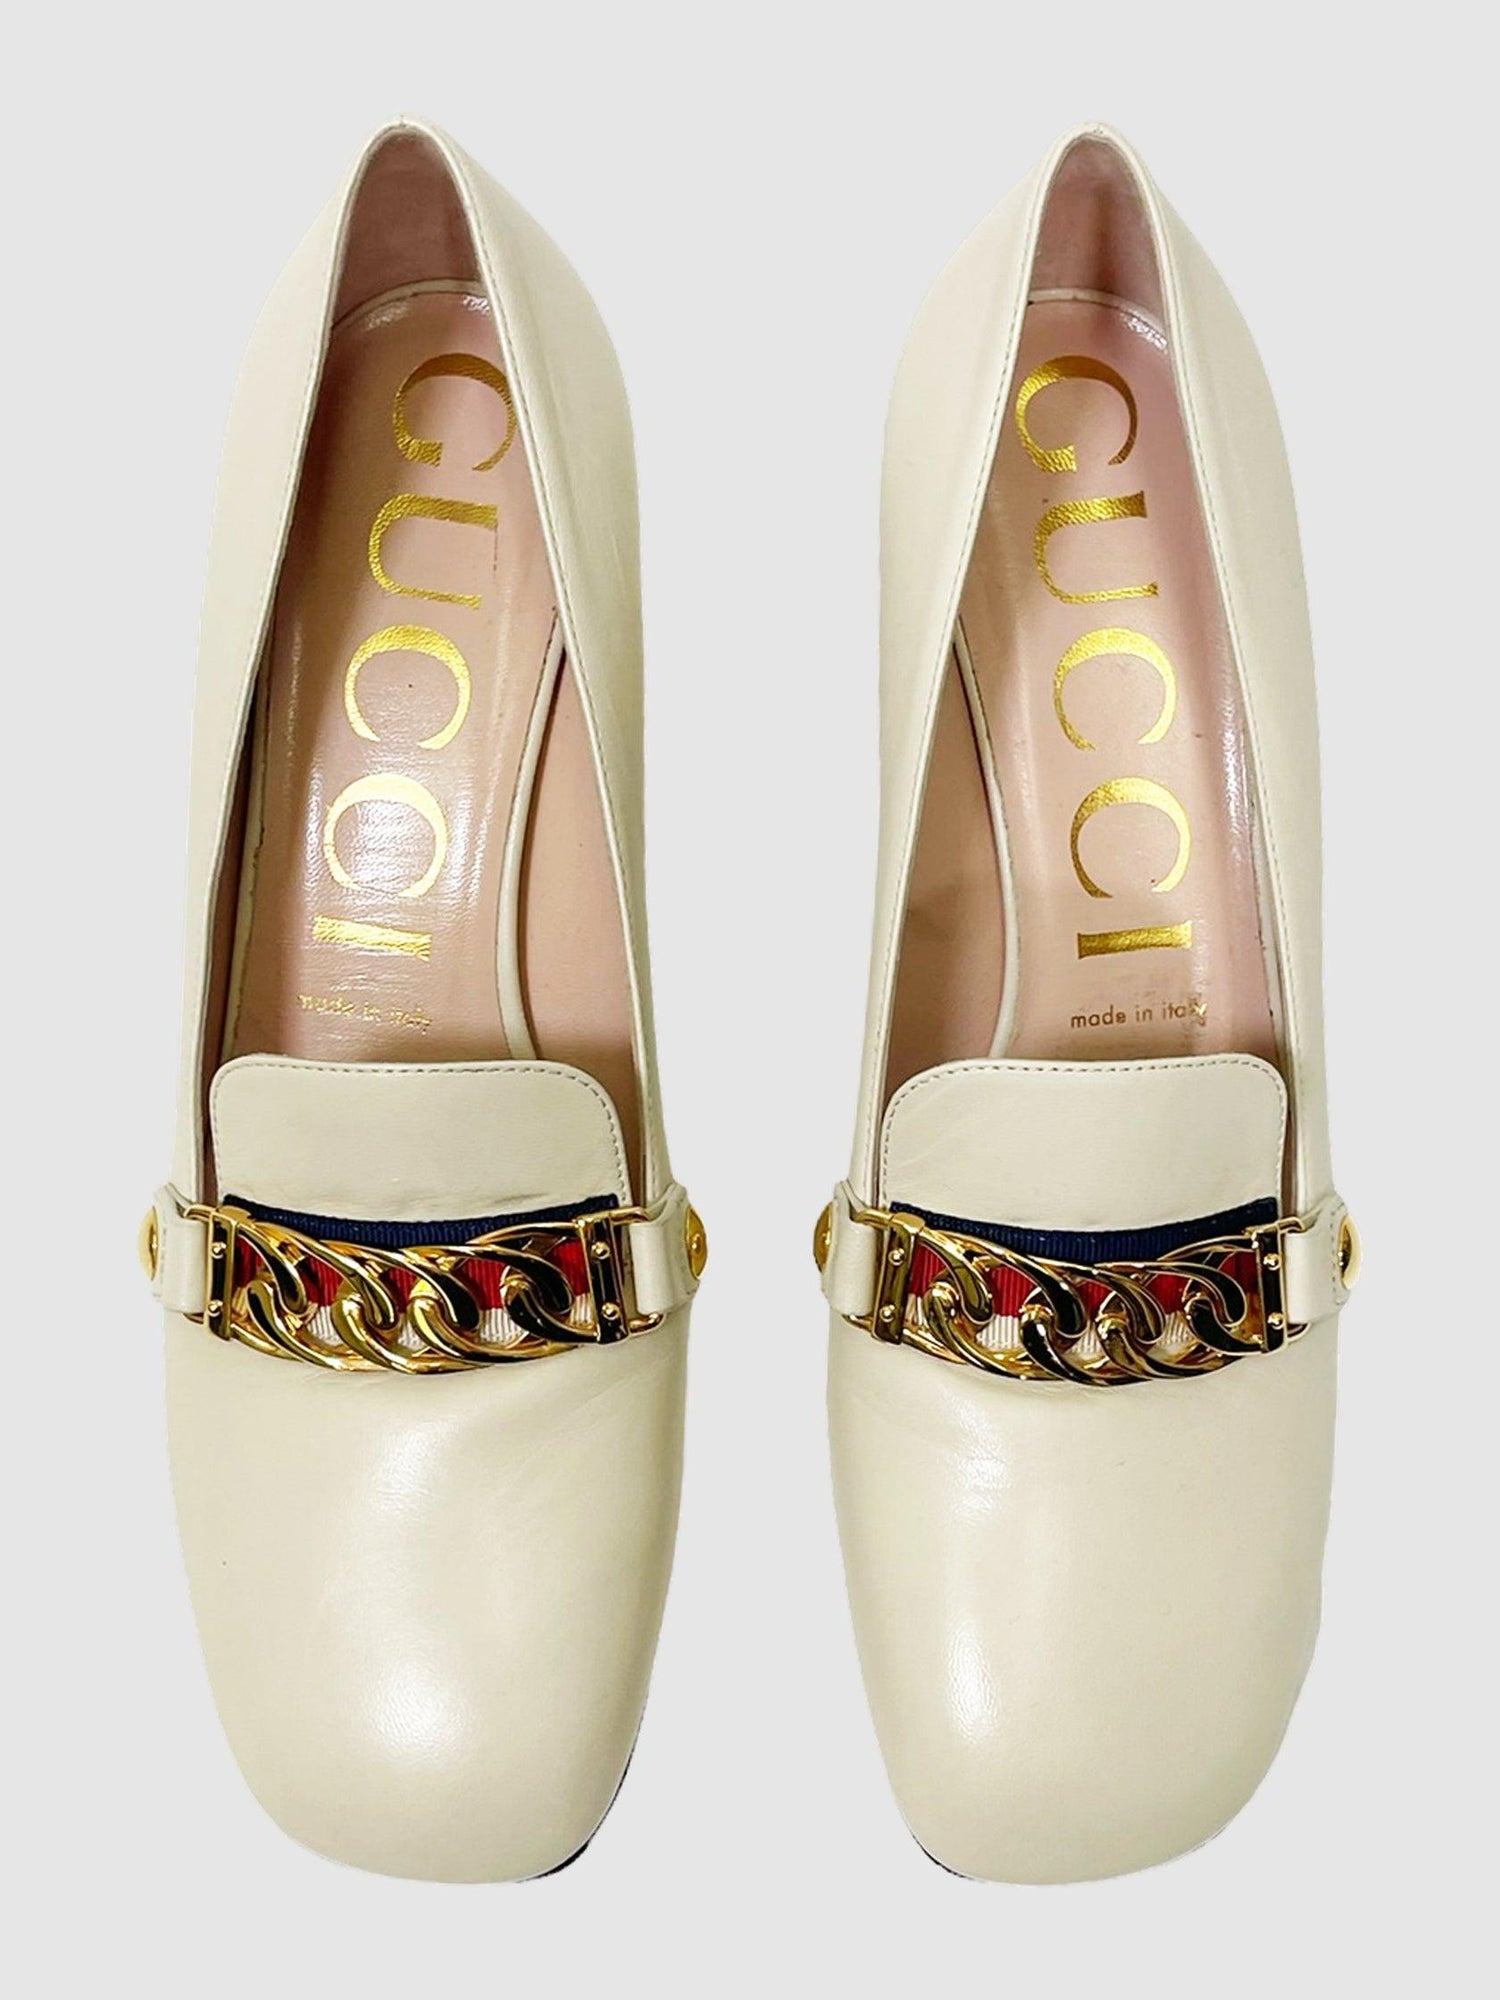 Gucci Beige Loafers - Size 38.5 - Second Nature Boutique